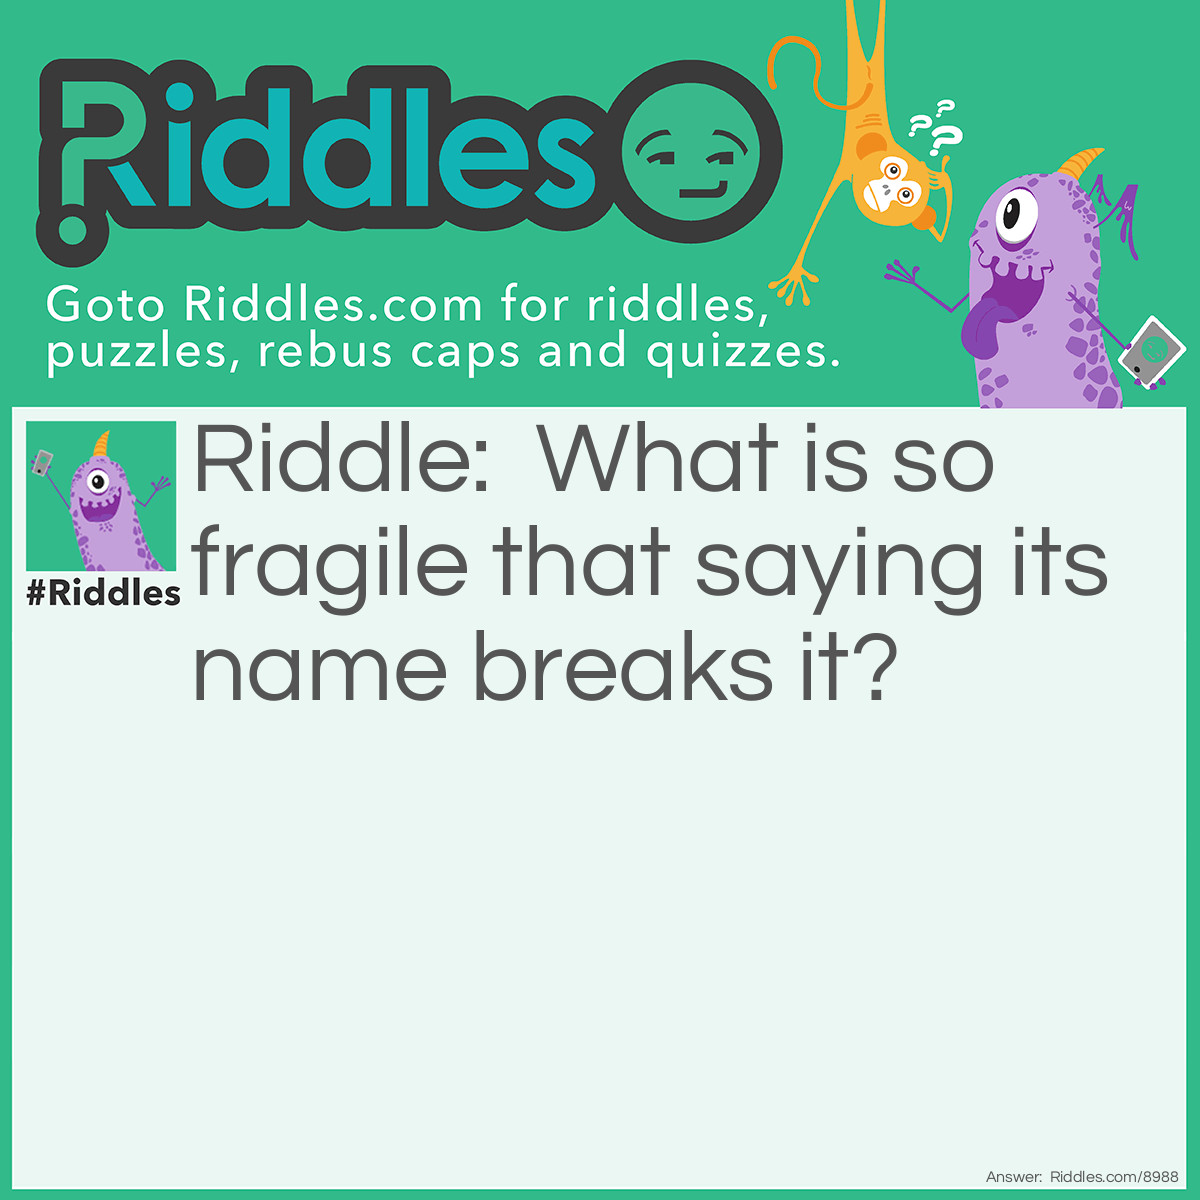 Riddle: What is so fragile that saying its name breaks it? Answer: Silence